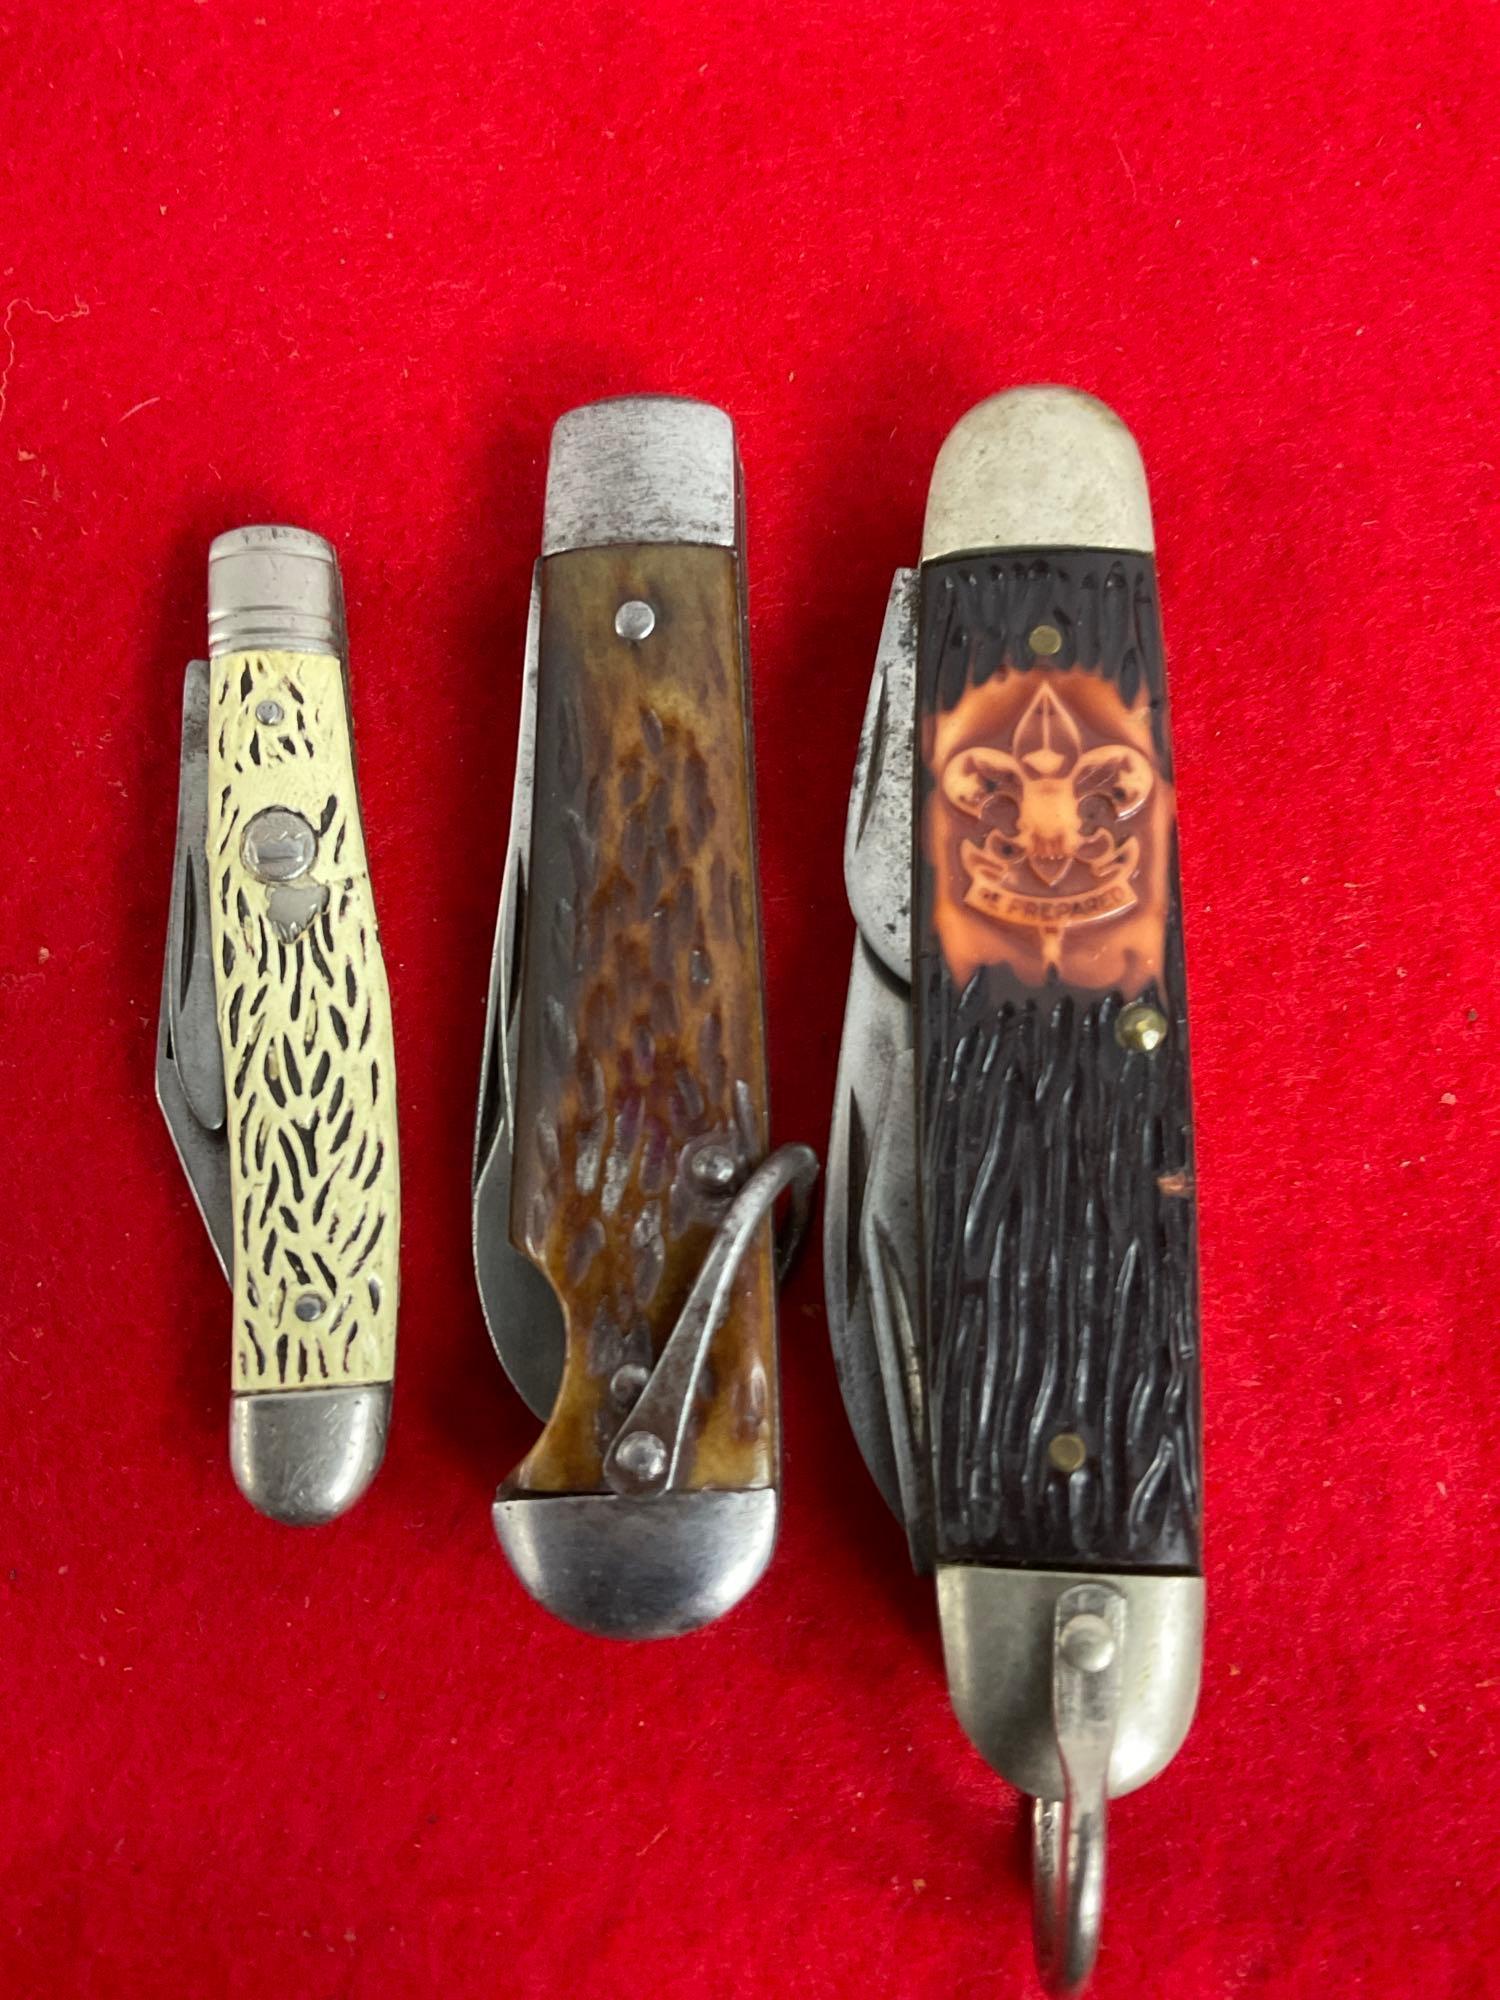 Trio of Vintage Imperial Multi Folding Blade Pocket Knives incl. Boy-scouts Edition w/ Engraving